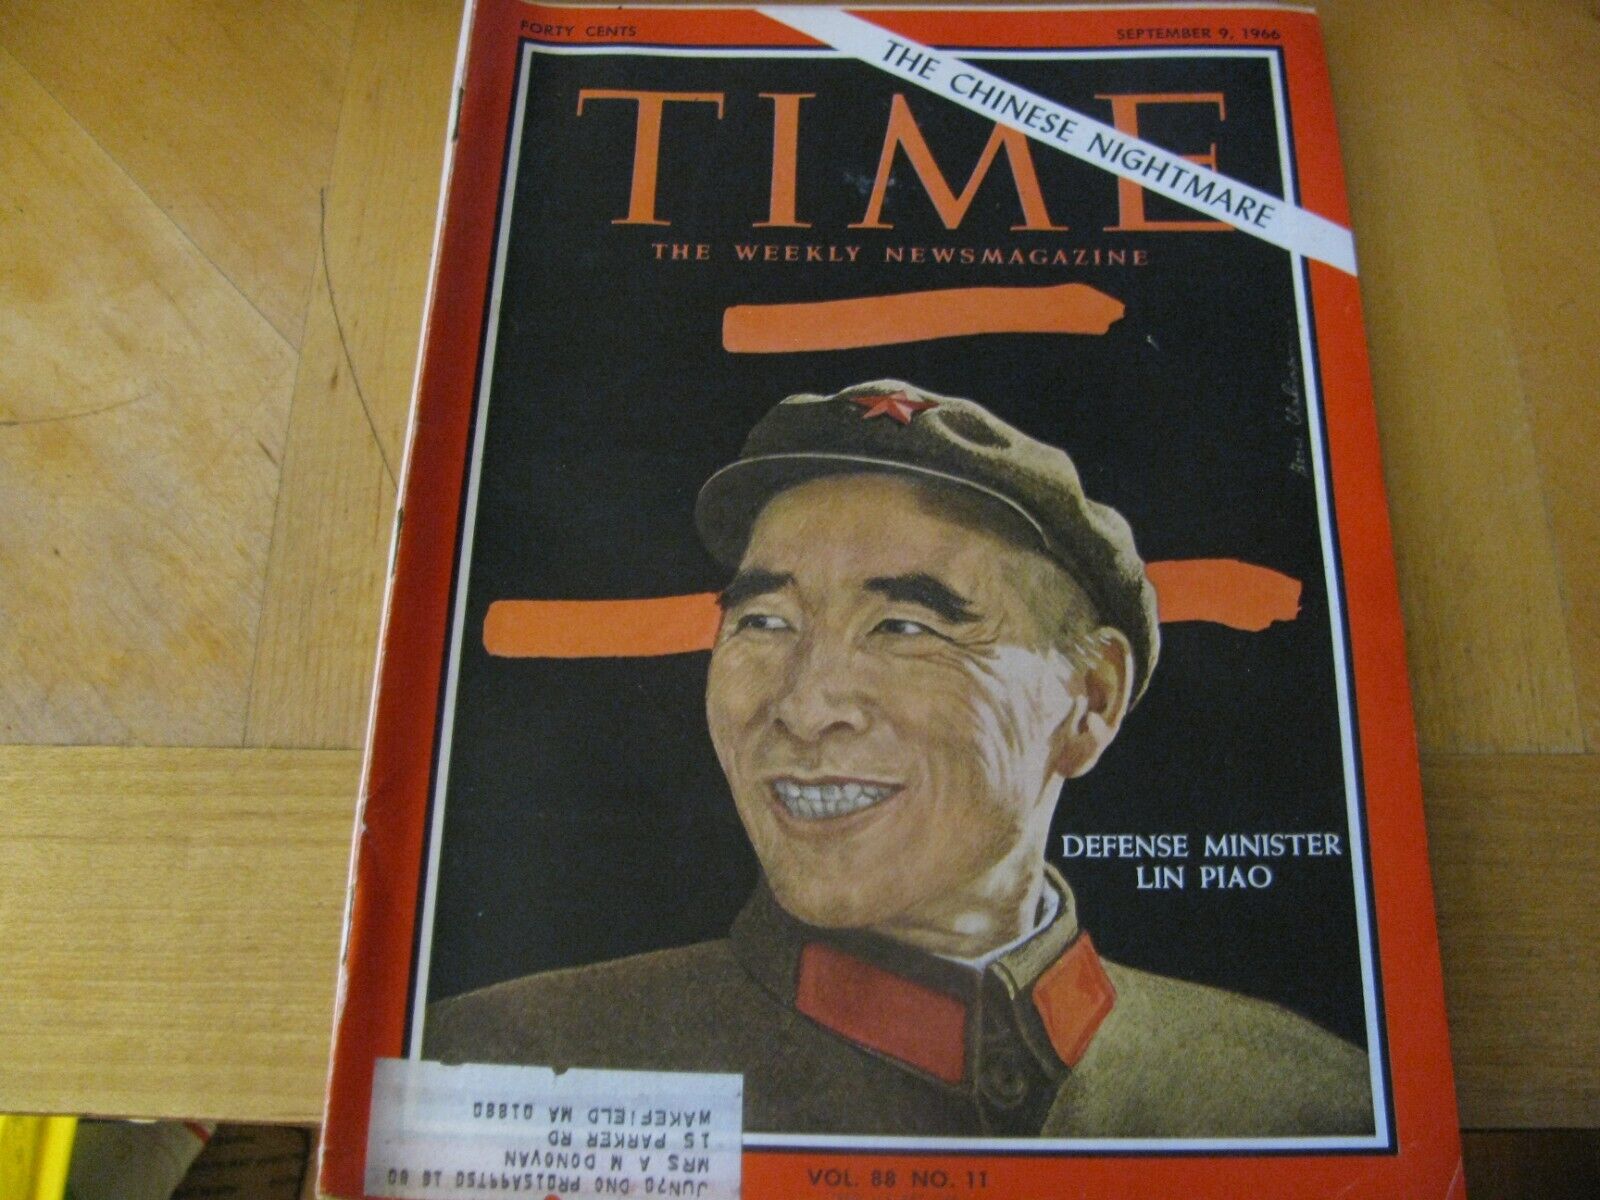 1966  TIME MAGAZINE SEPTEMBER 9  DEFENSE MINISTER LIN PIAO  LOWEST PRICE ON EBAY